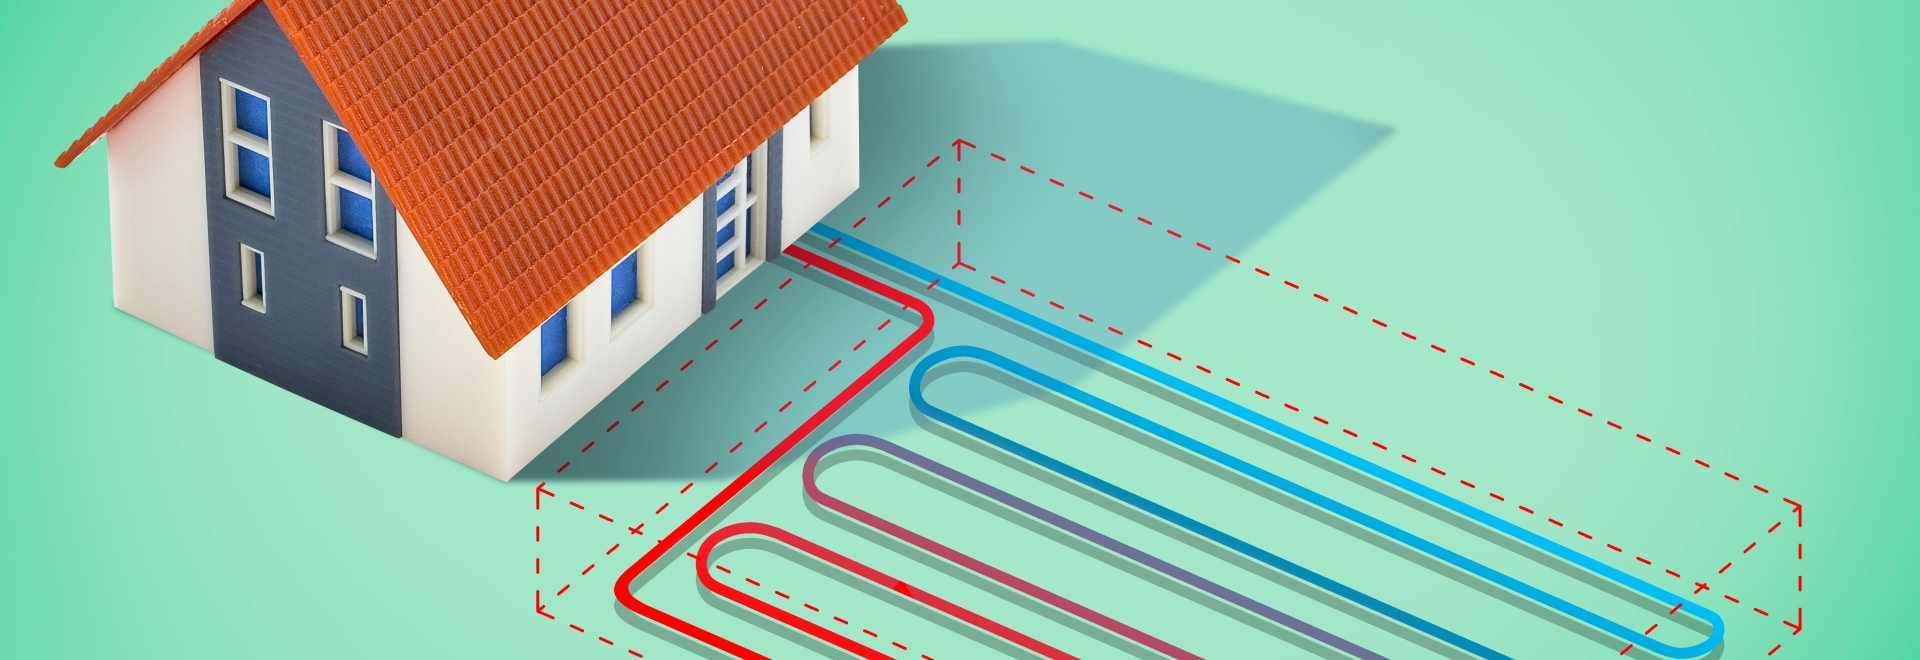 drawing of a home using geothermal to heat/cool